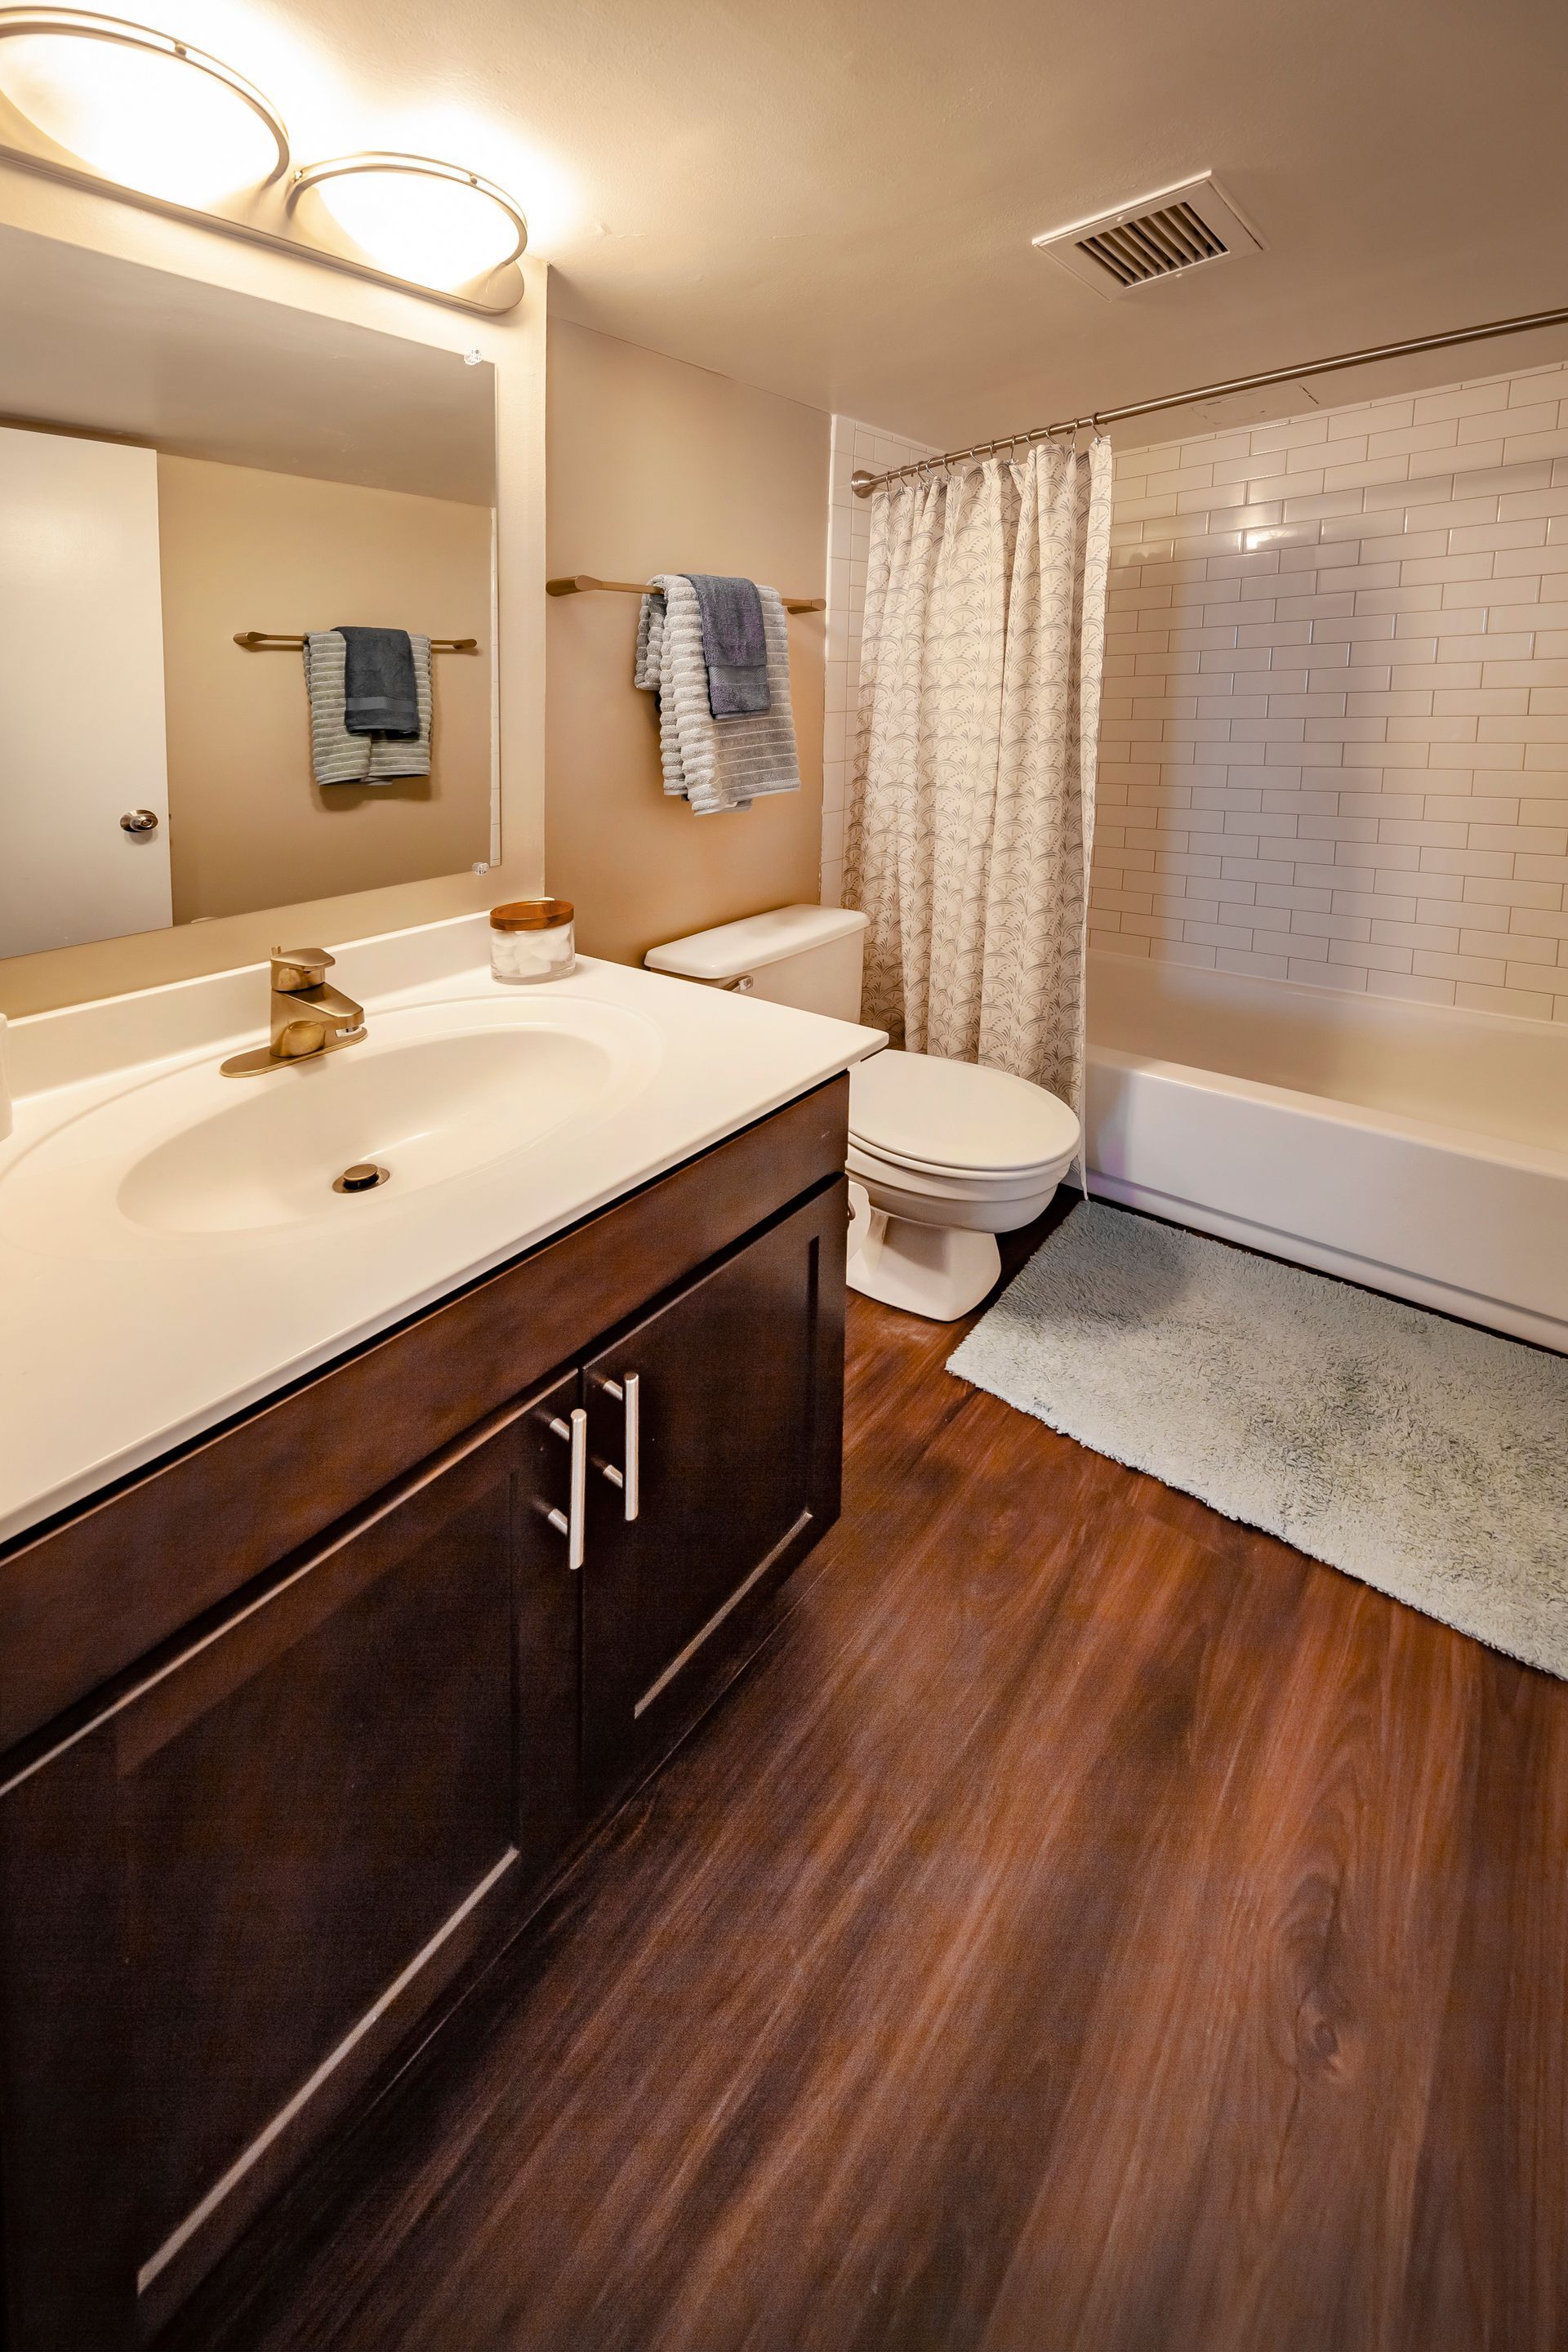 A bathroom with a sink , toilet , bathtub and mirror at  Riley Towers, Indianapolis, IN. 